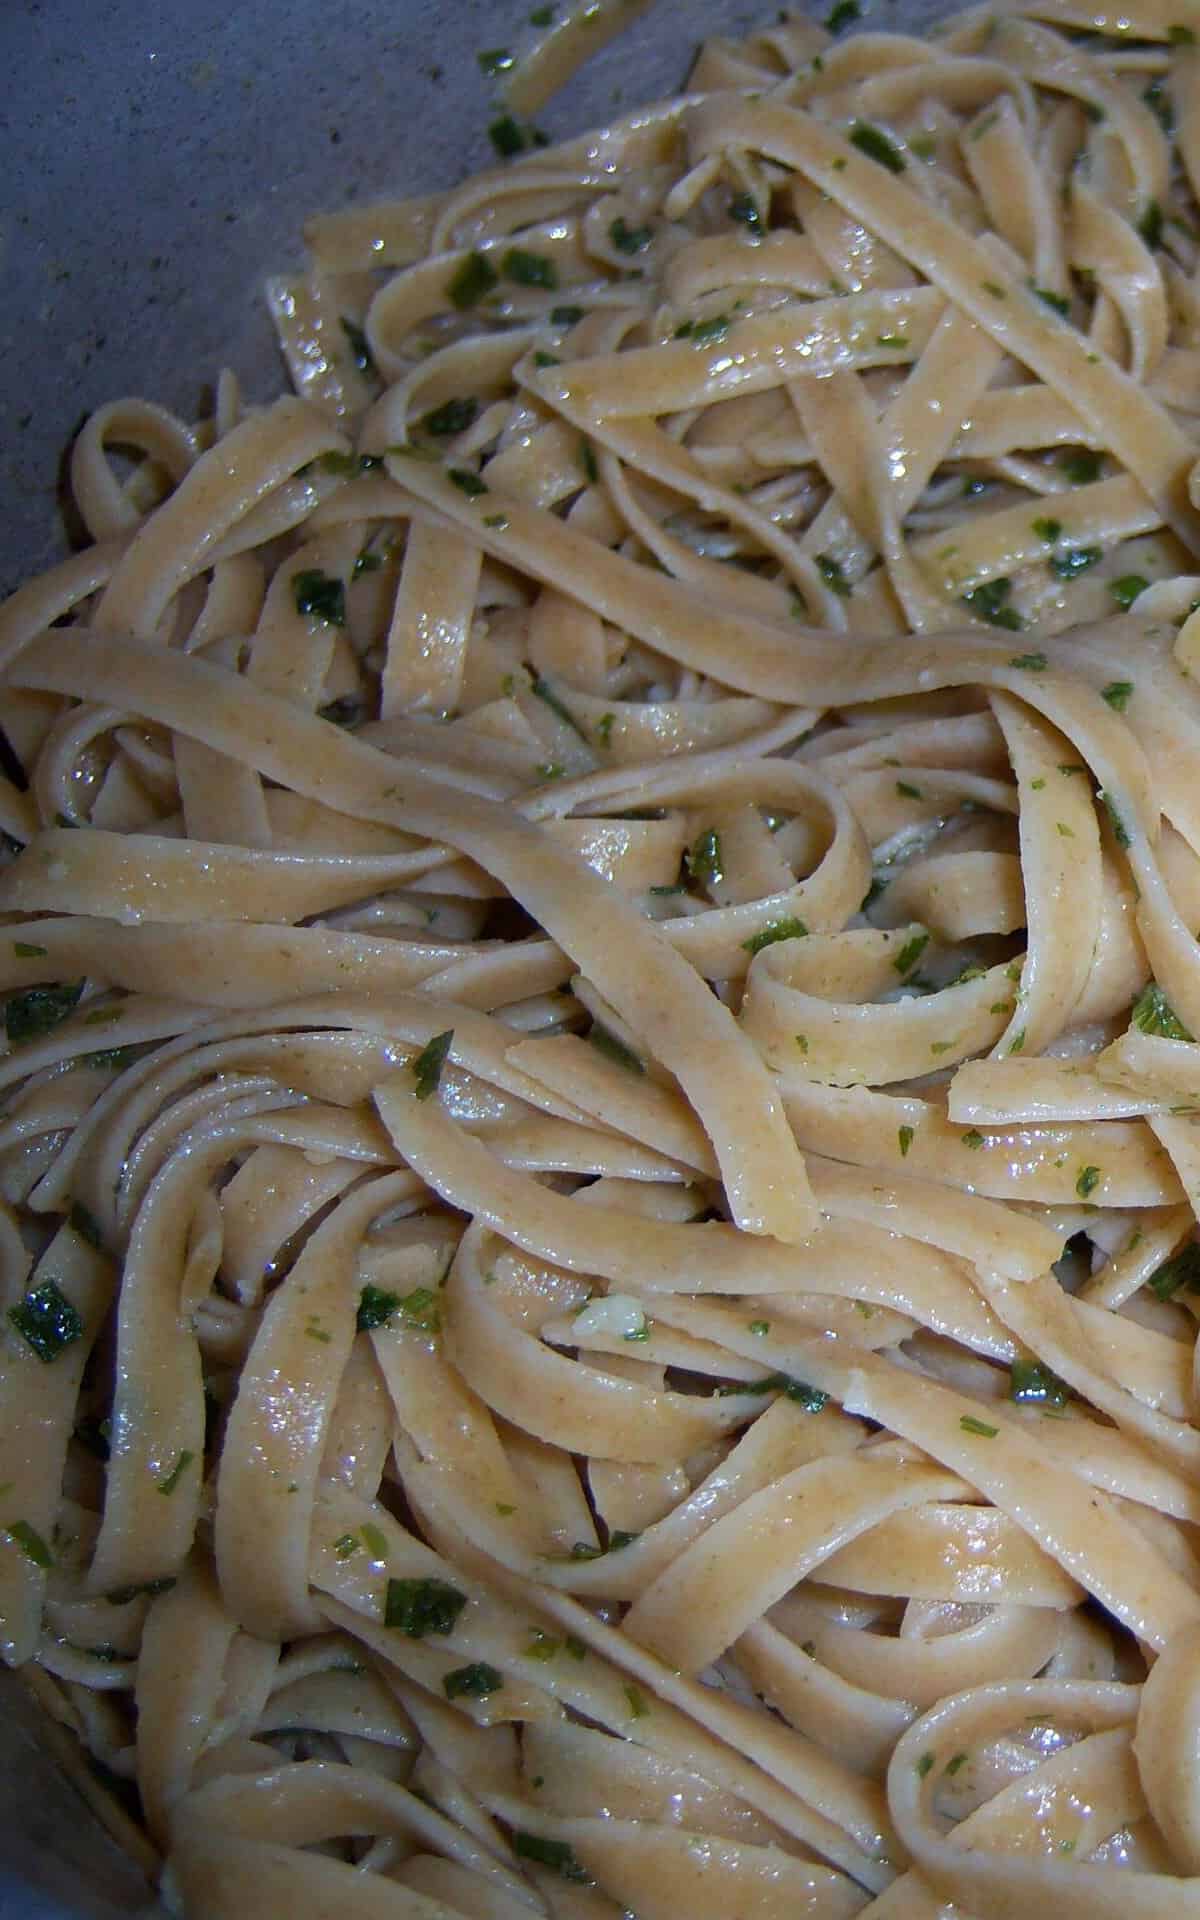  These noodles are the ultimate comfort food.